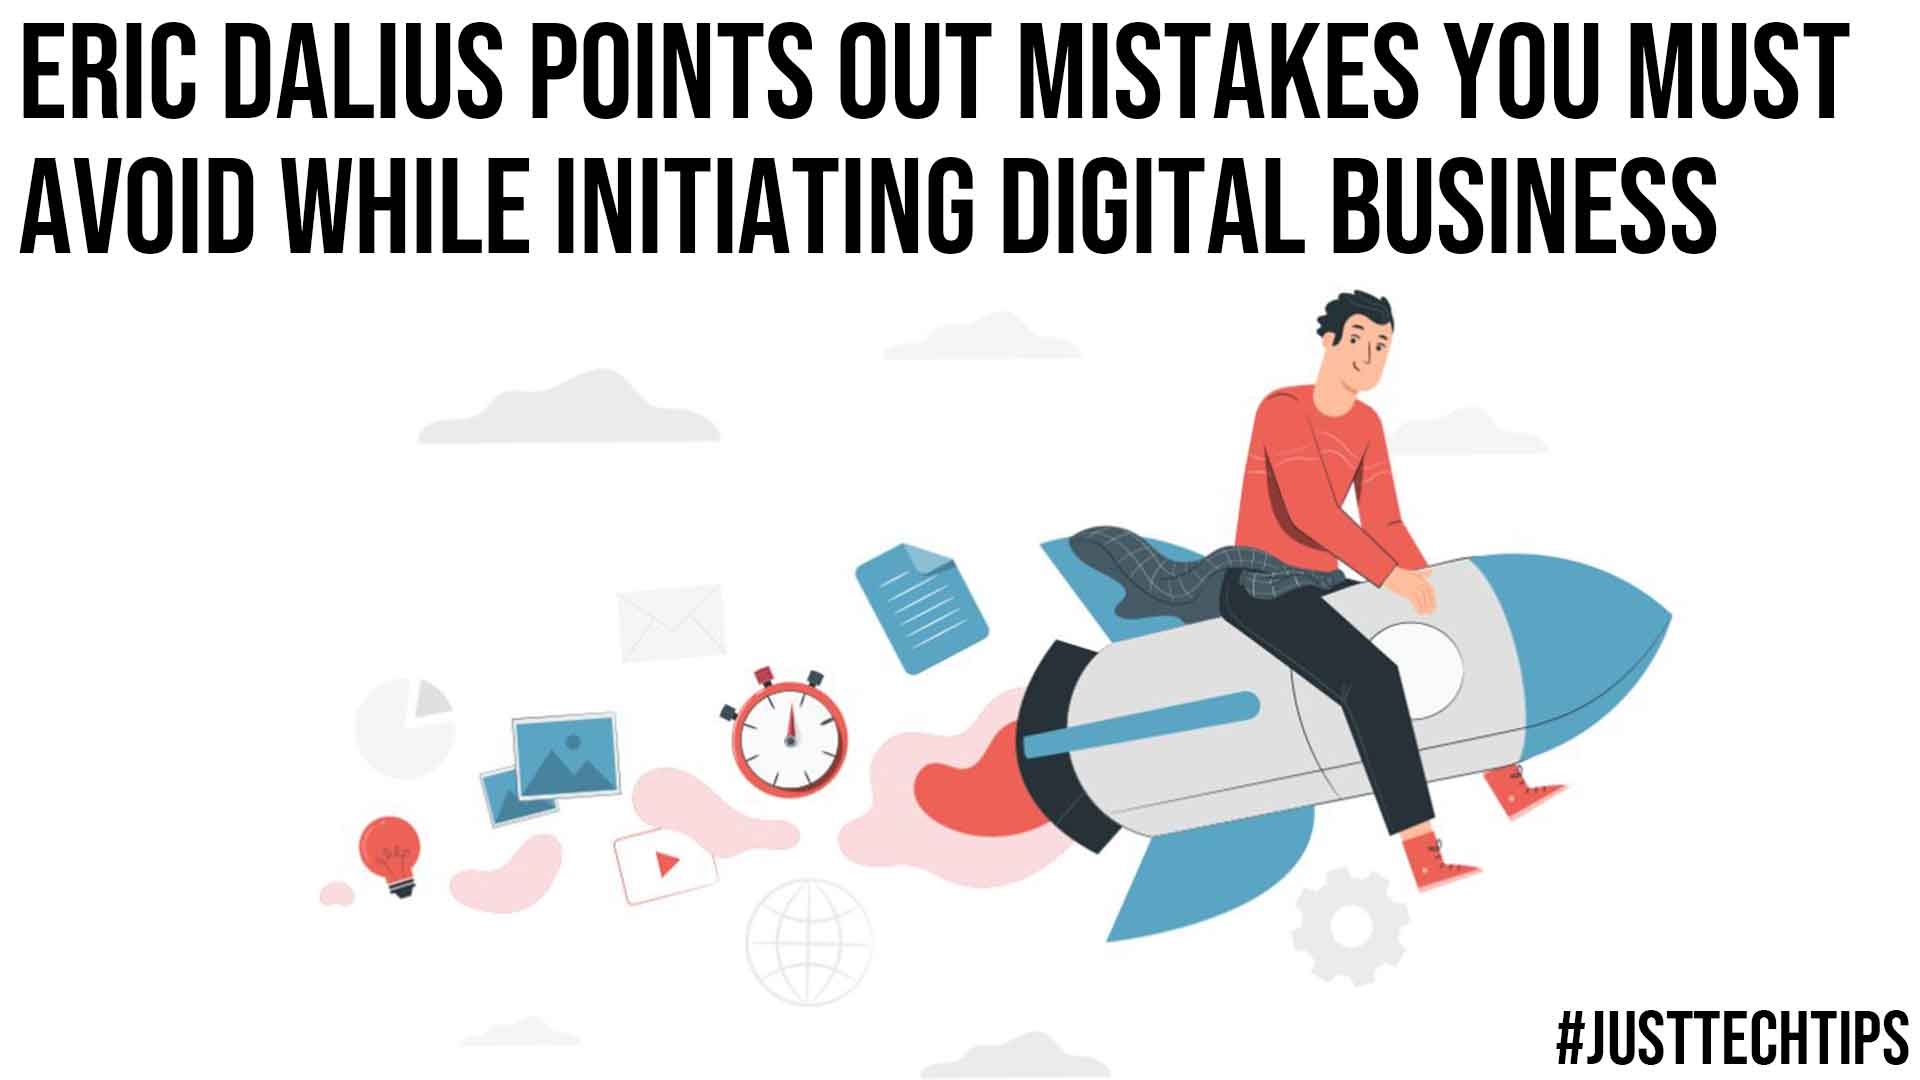 Eric Dalius Points Out Mistakes You Must Avoid While Initiating Digital Business